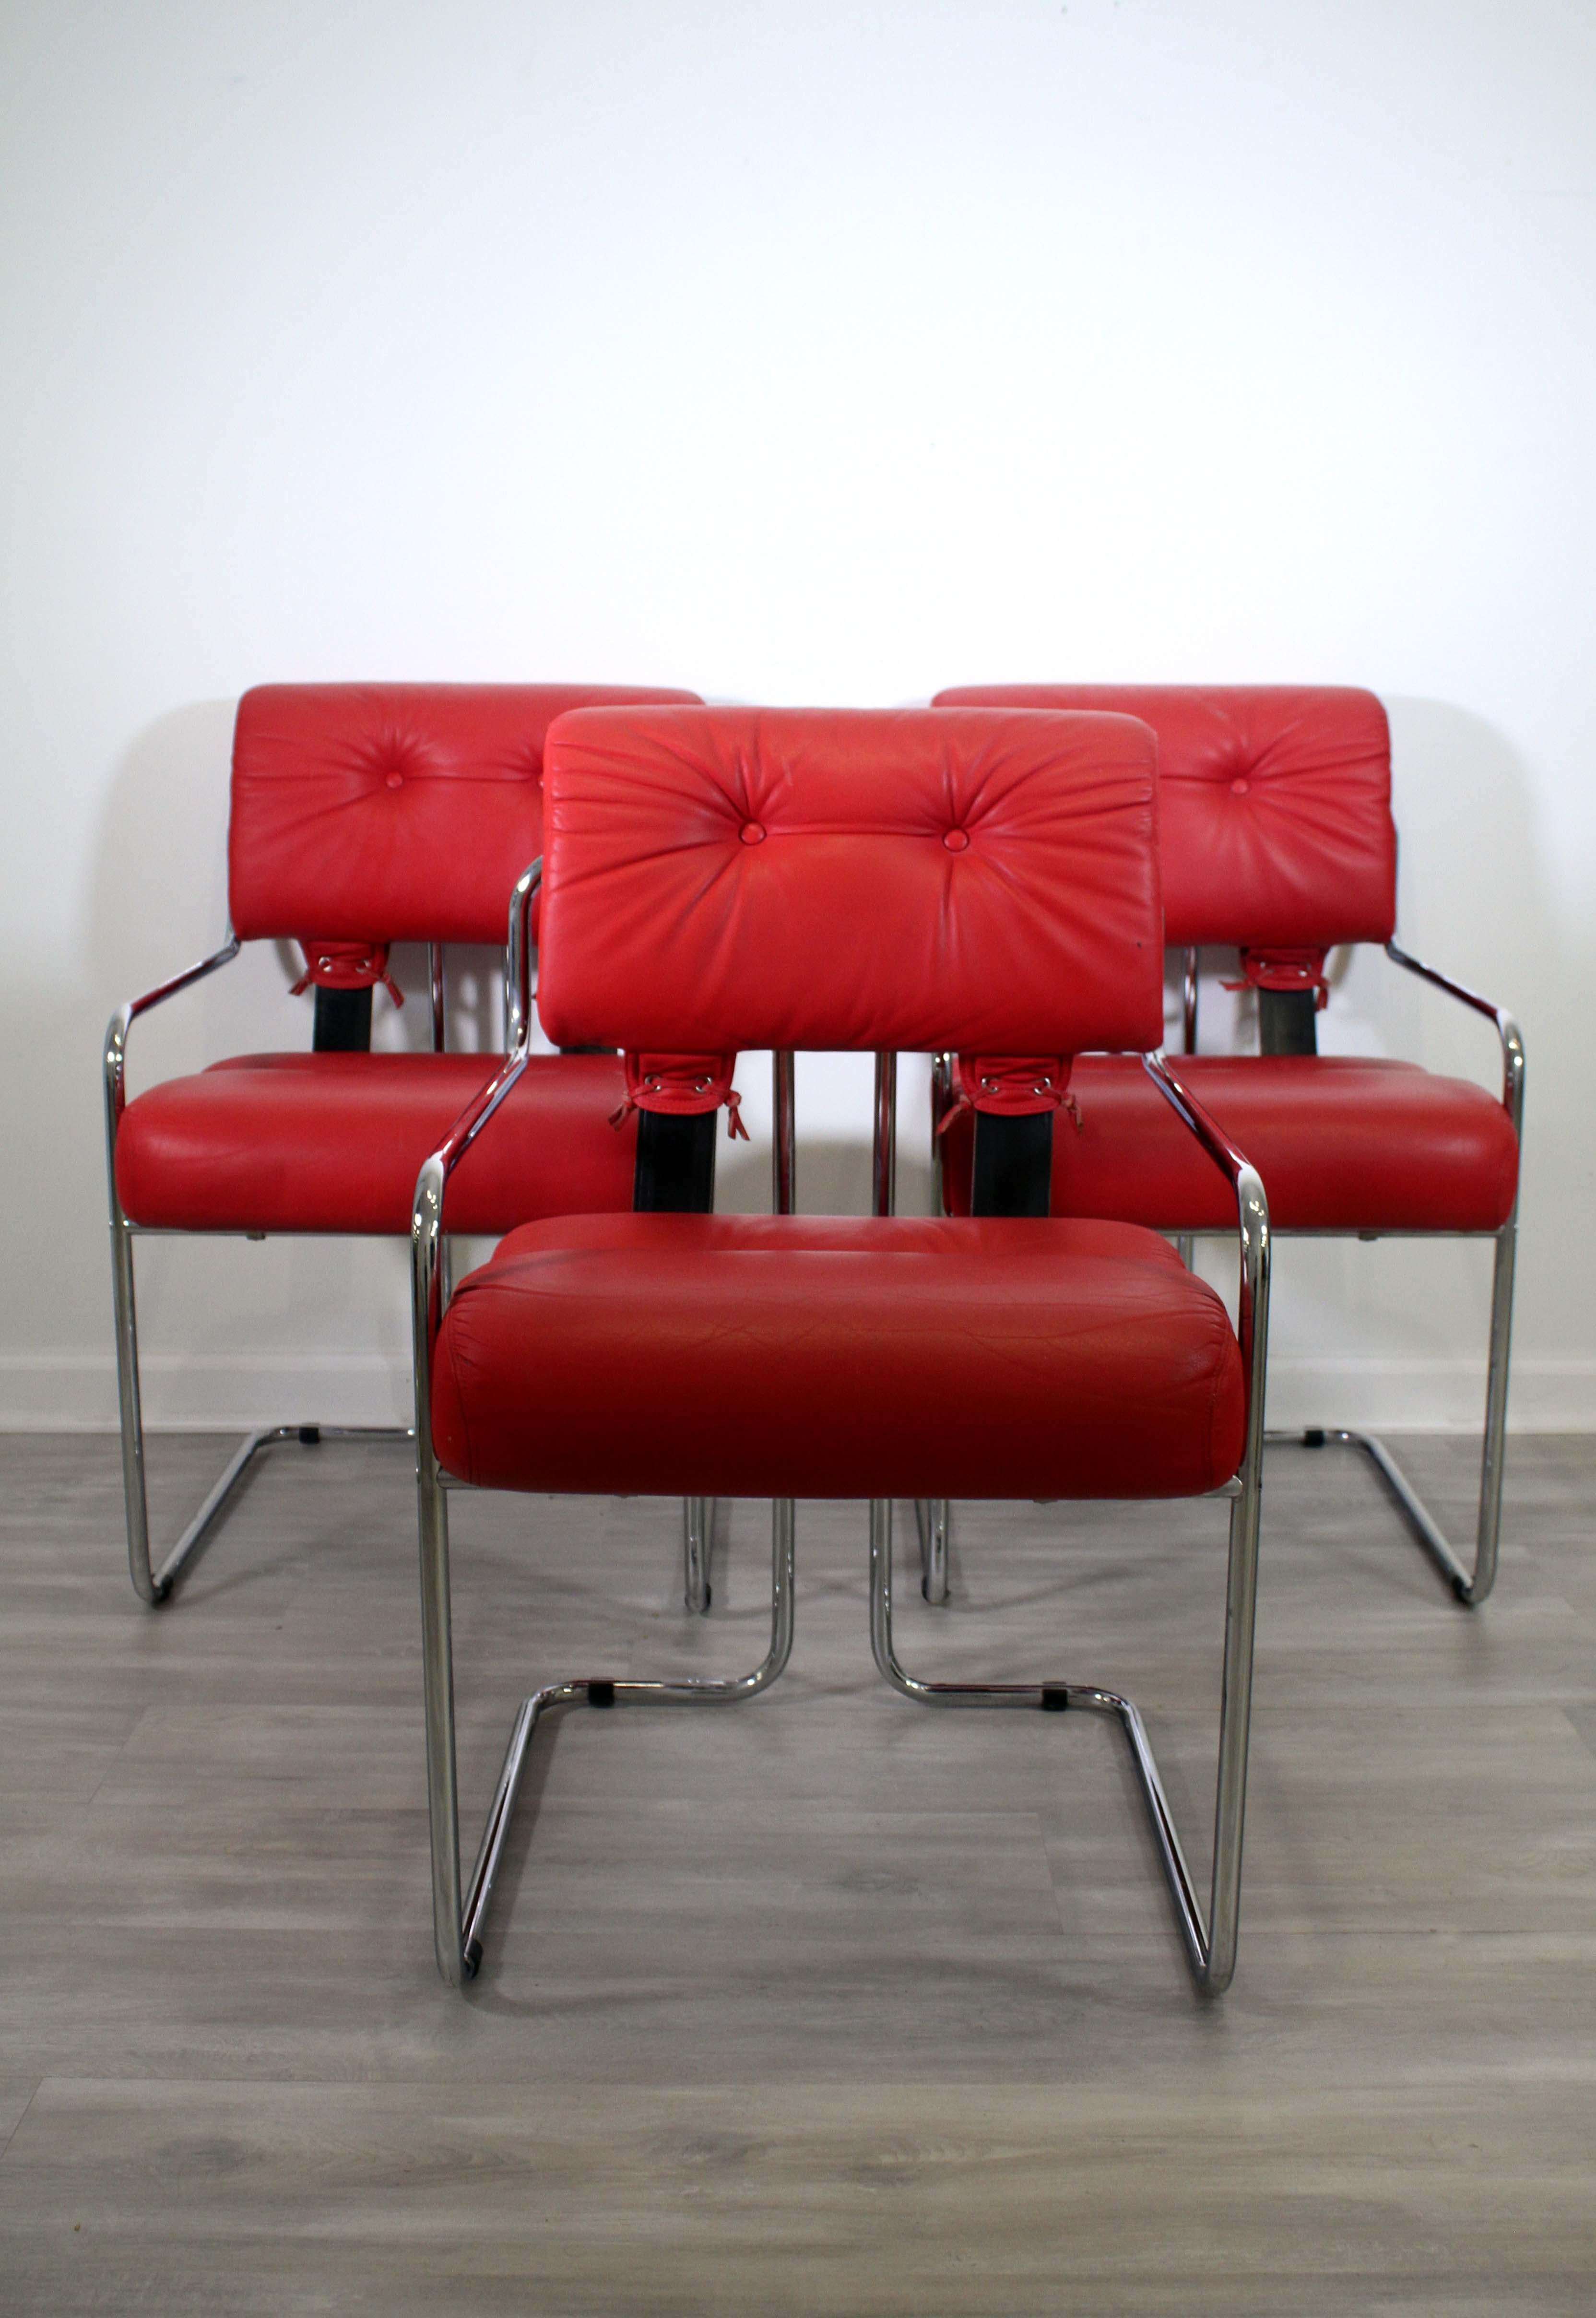 This set of 3 Faleschini for pace tucroma red leather chairs are an elegant and modern seating solution for any living space. Constructed from luxurious red leather, the chairs are designed with a unique curved shape that is both inviting and